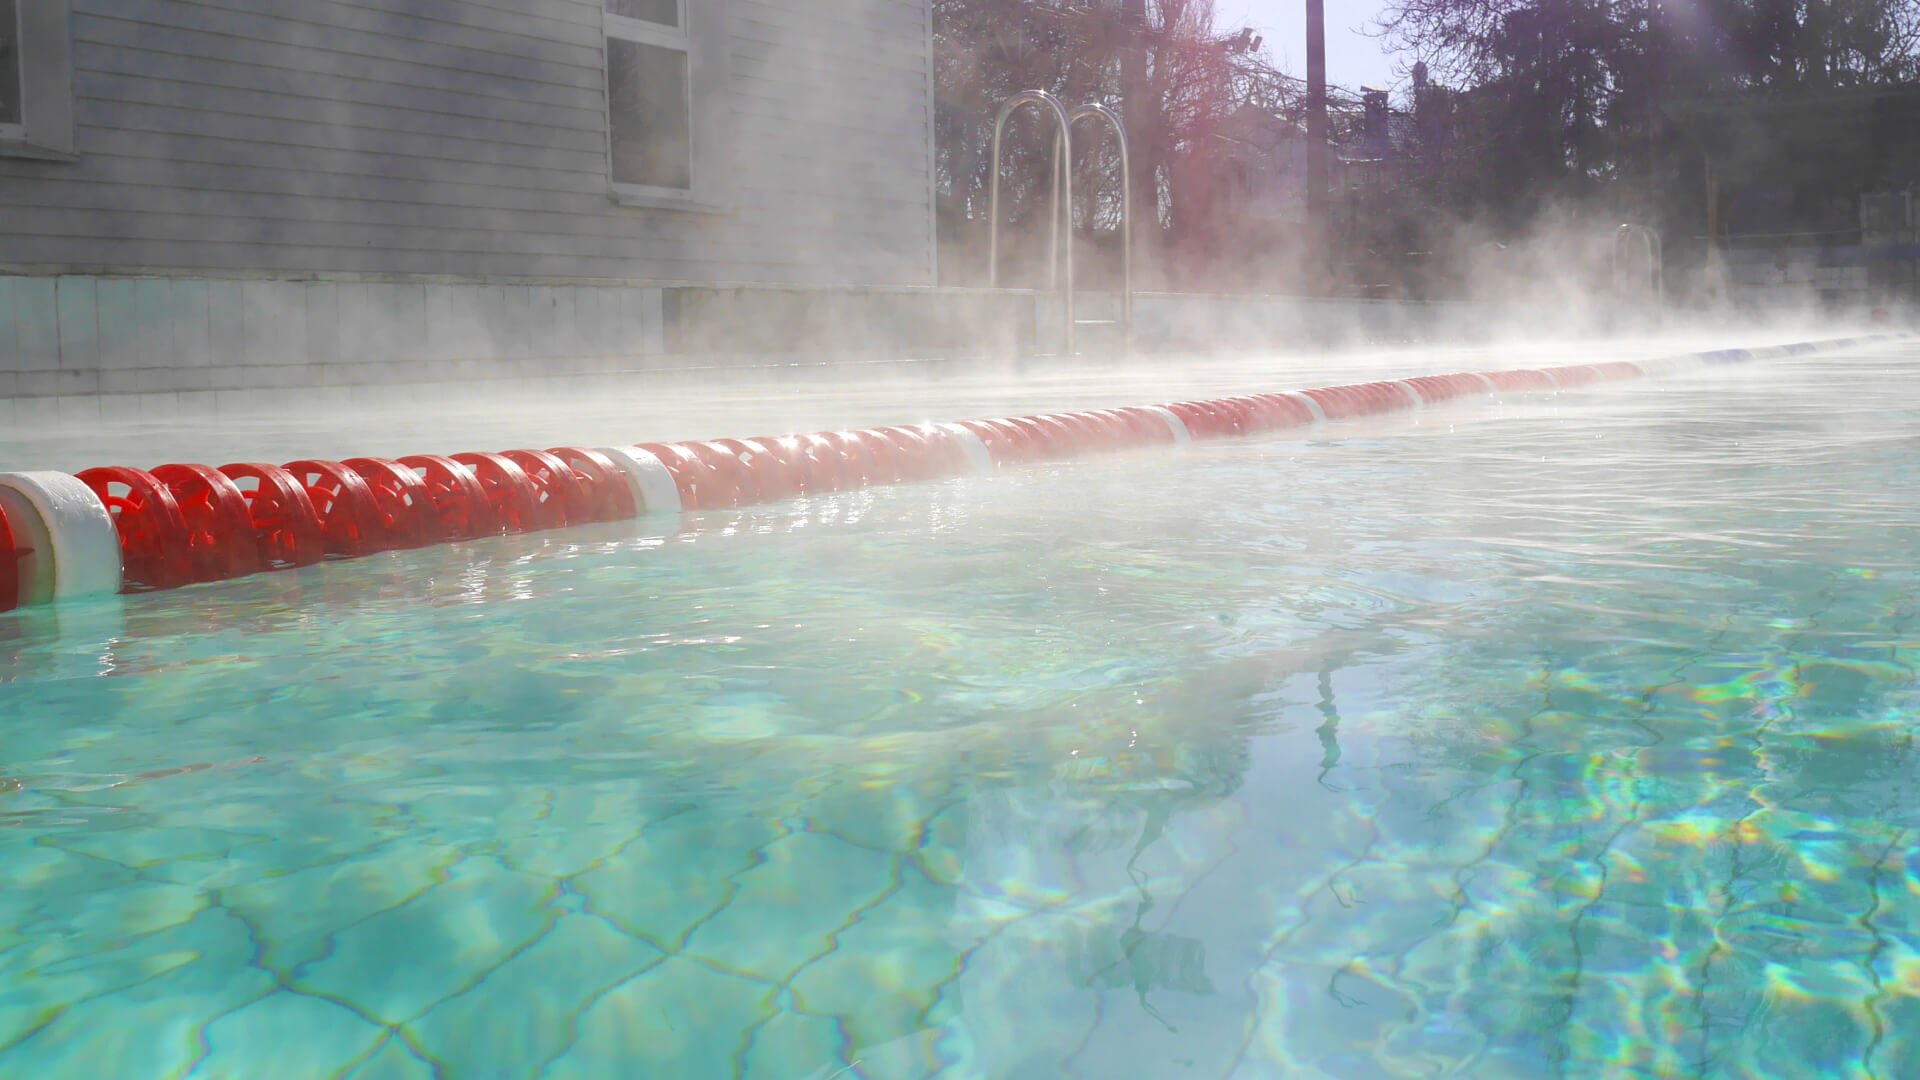 A swimming pool with visible billowing steam rising from the warm water and a red and white floating lane divider.